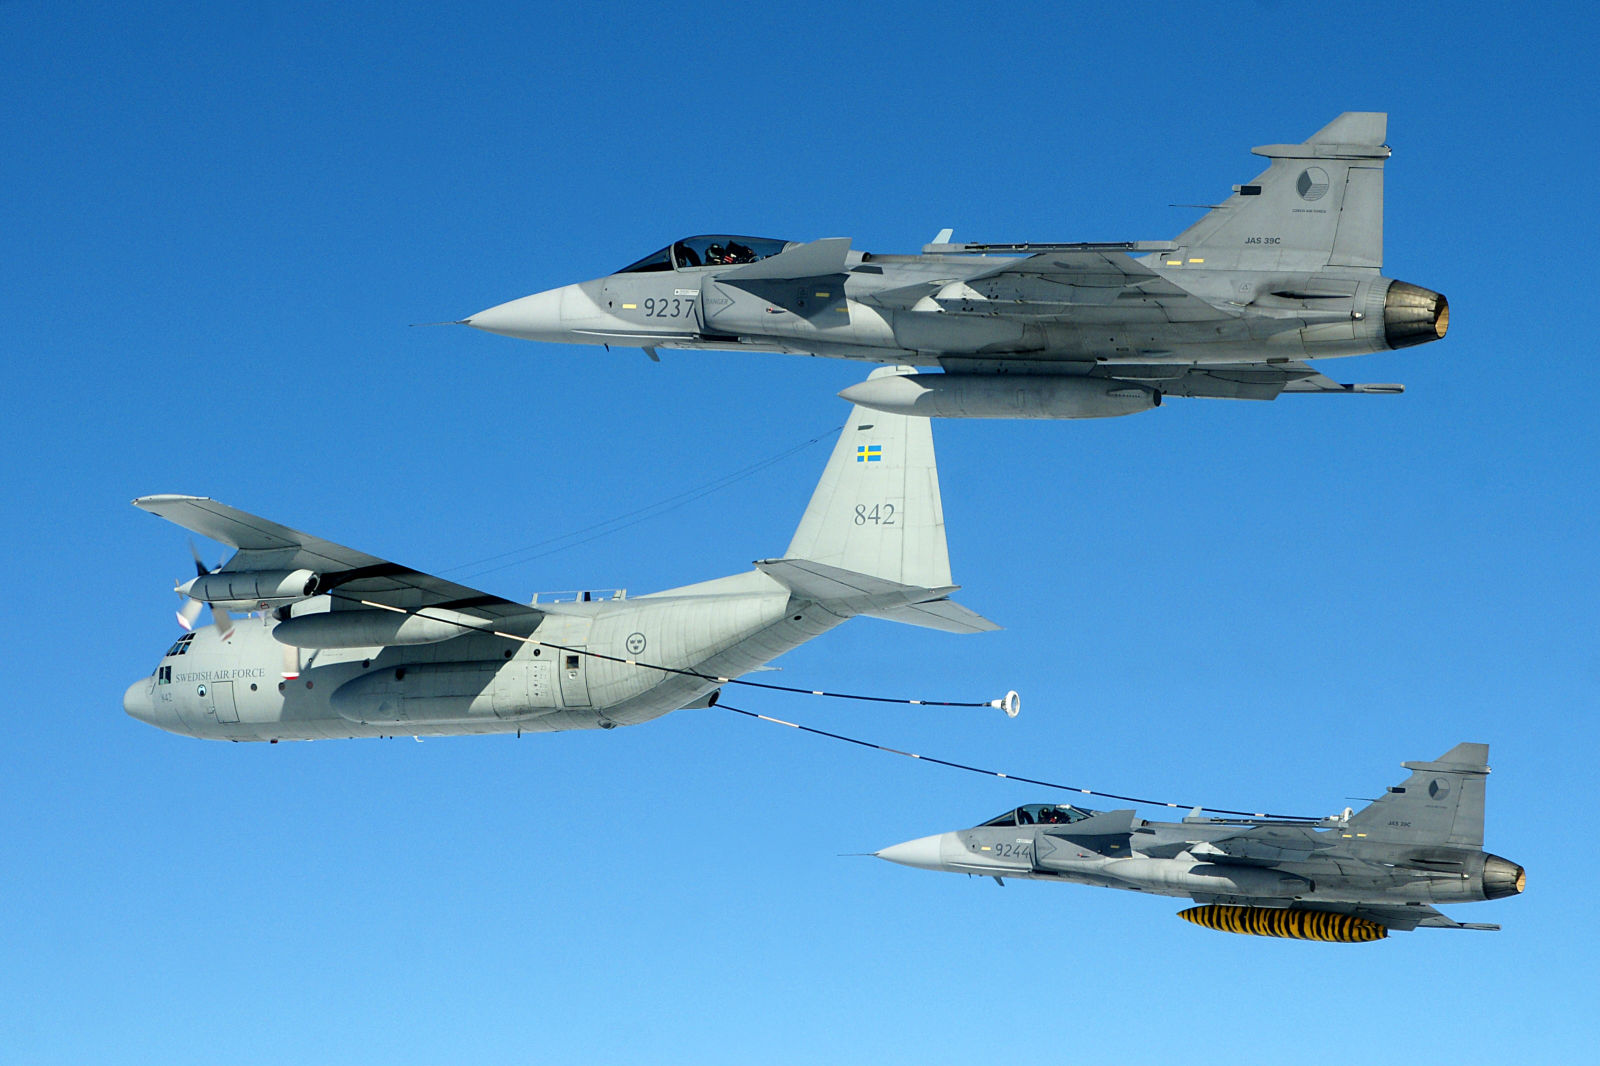 Two Saab JAS-39 fighters of the Czech Air Force receive fuel from a Swedish Air Force Hercules in 2016